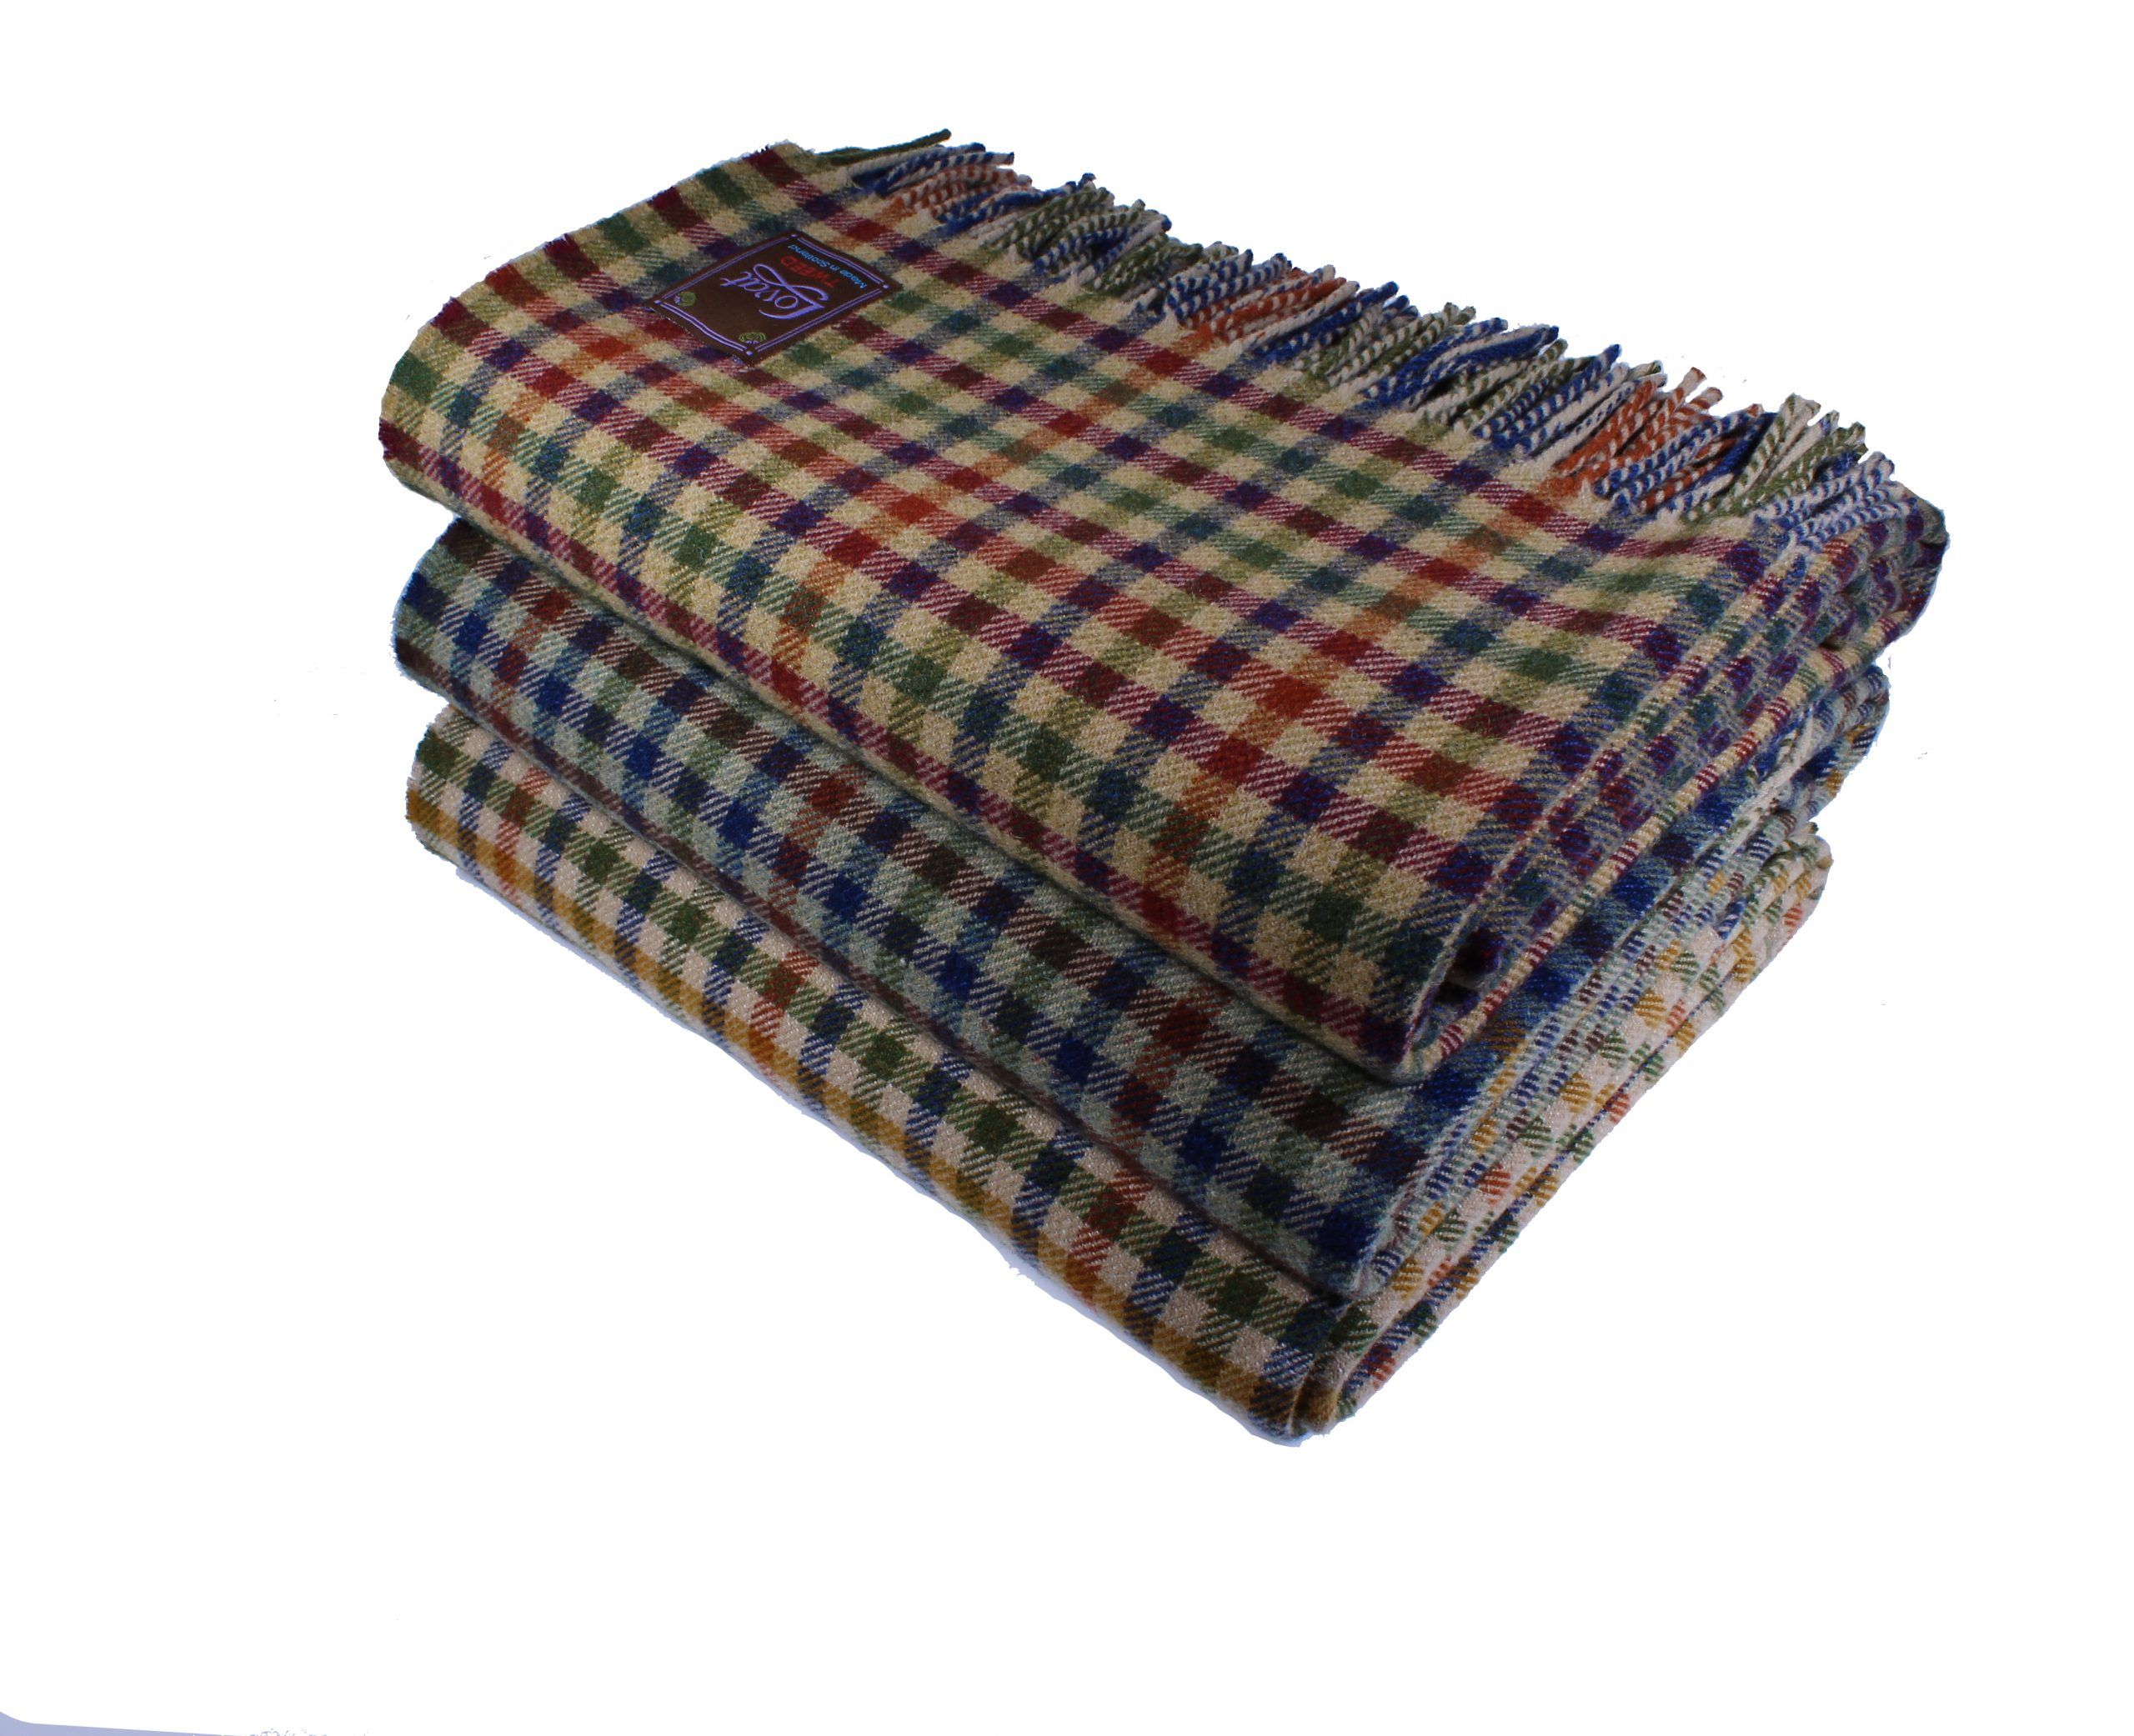 Lavender Scented 100% Lambswool Throw - Lovat Mill is the Home of Tweed